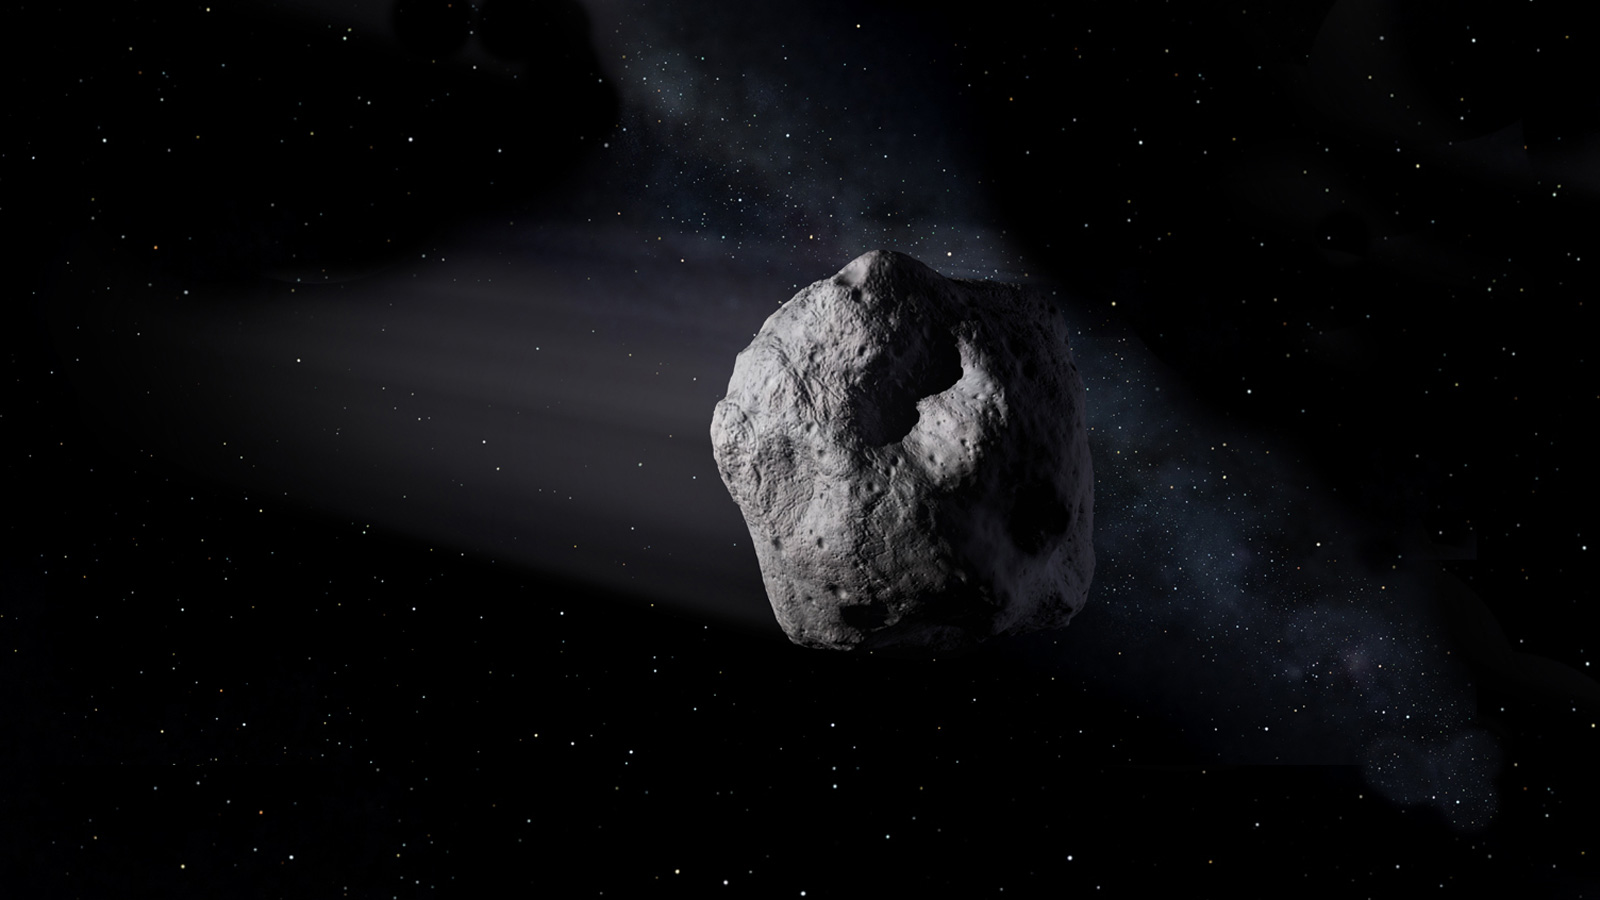 An artist's depiction of a near-Earth asteroid.